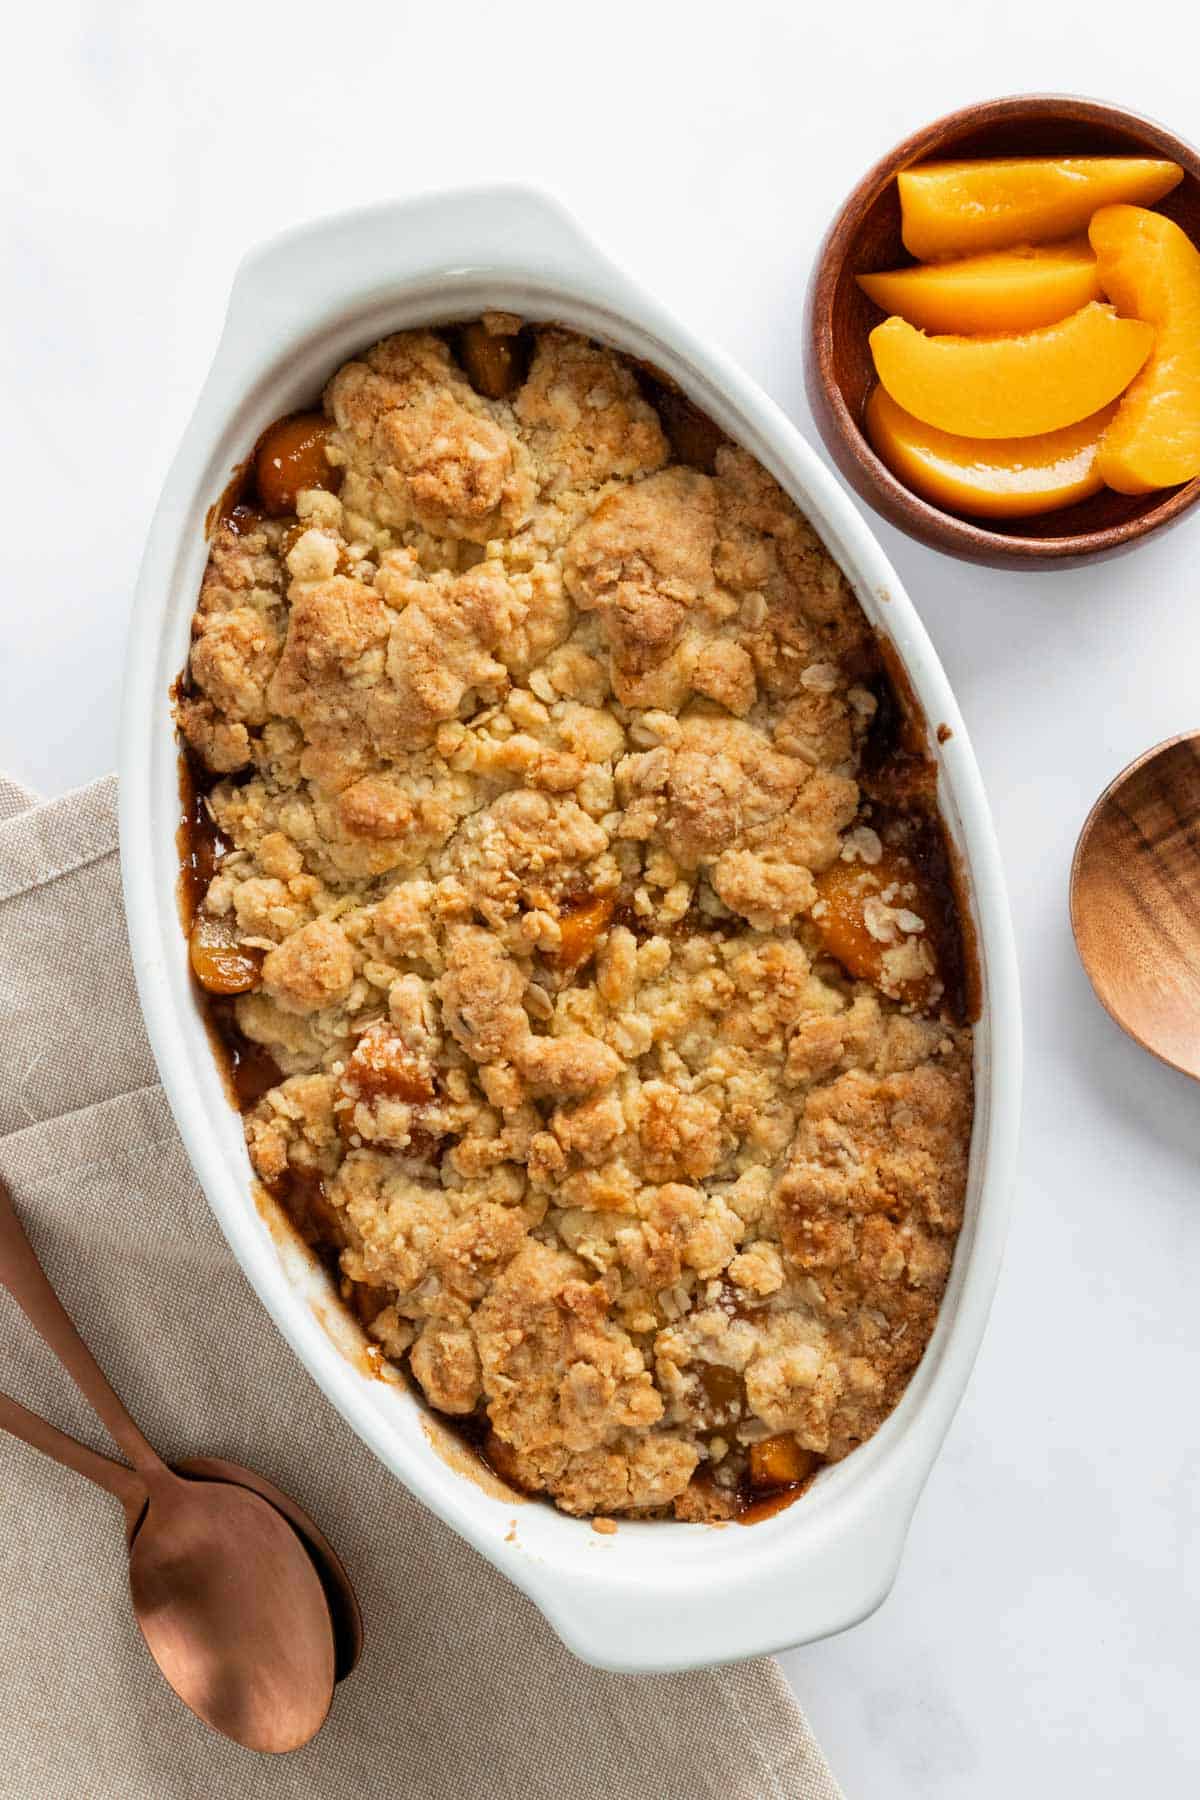 peach cobbler with golden brown topping in casserole dish.